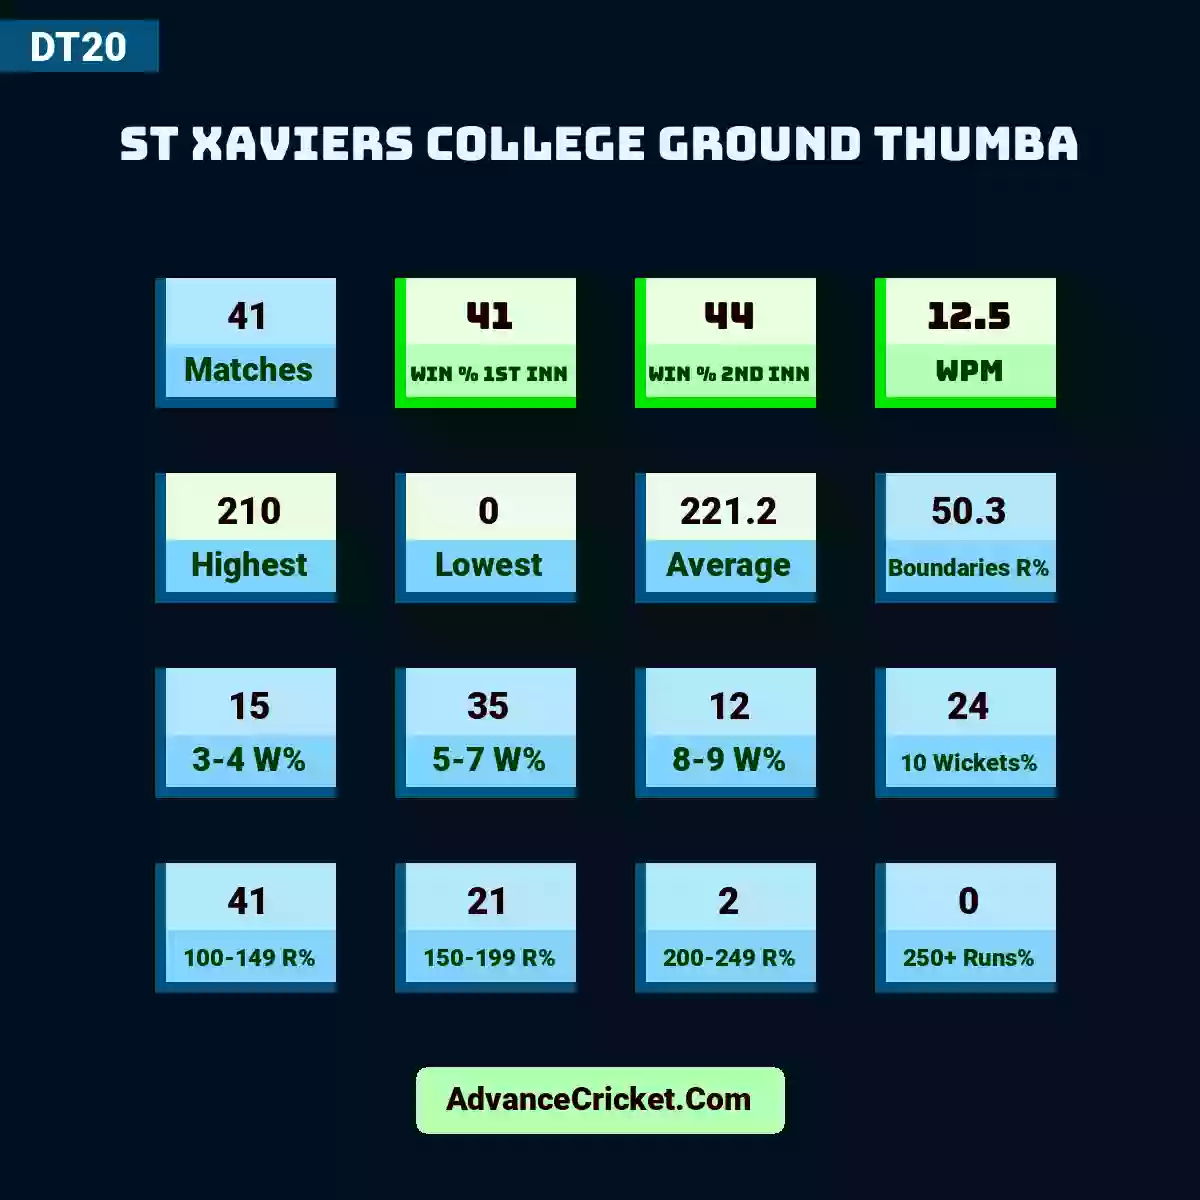 Image showing St Xaviers College Ground Thumba DT20 with Matches: 20, Win % 1st Inn: 45, Win % 2nd Inn: 55, WPM: 14.1, Highest: 210, Lowest: 52, Average: 284.2, Boundaries R%: 55.4, 3-4 W%: 18, 5-7 W%: 33, 8-9 W%: 18, 10 Wickets%: 30, 100-149 R%: 43, 150-199 R%: 40, 200-249 R%: 5, 250+ Runs%: 0.